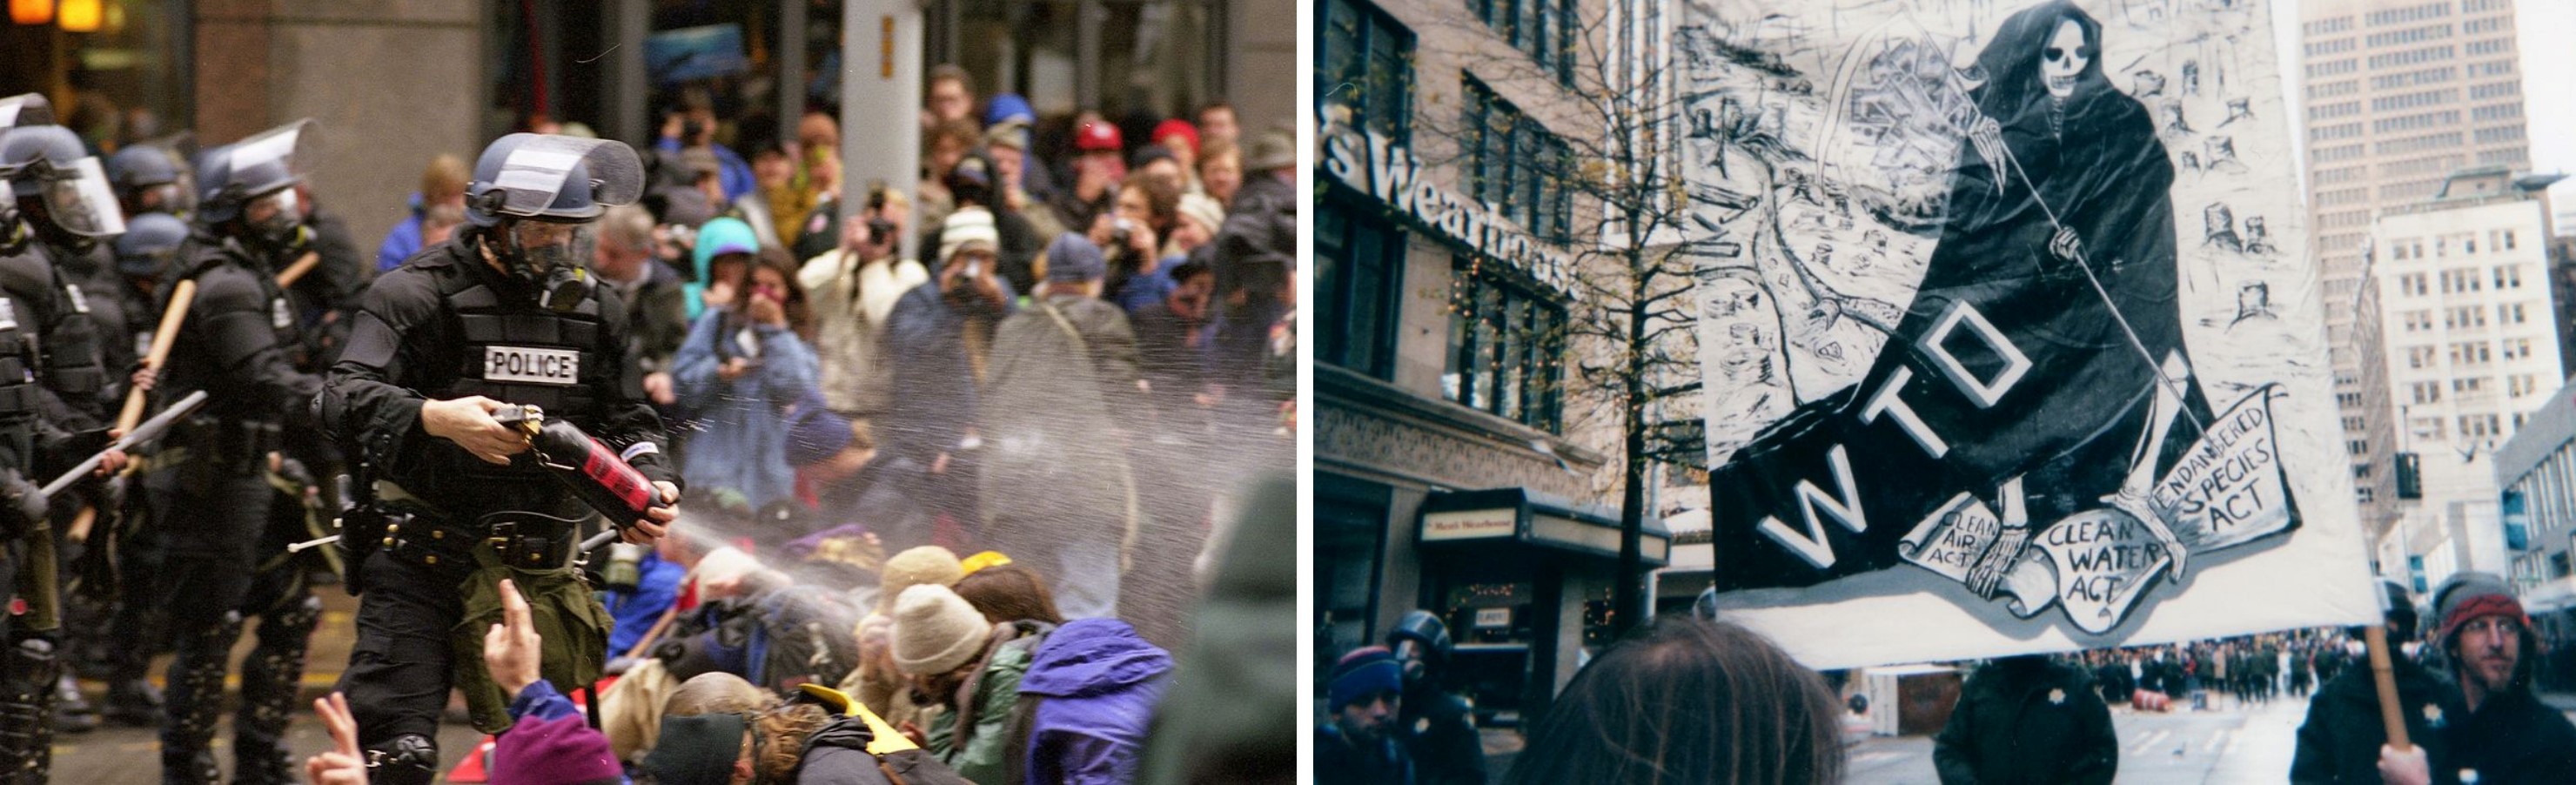 On the left, Seattle Police spraying opponents of the World Trade Organization (WTO) with pepper spray. On the right, a sign from the 1999 WTO protests in Seattle, Washington depicting the WTO as the Grimm Reaper.